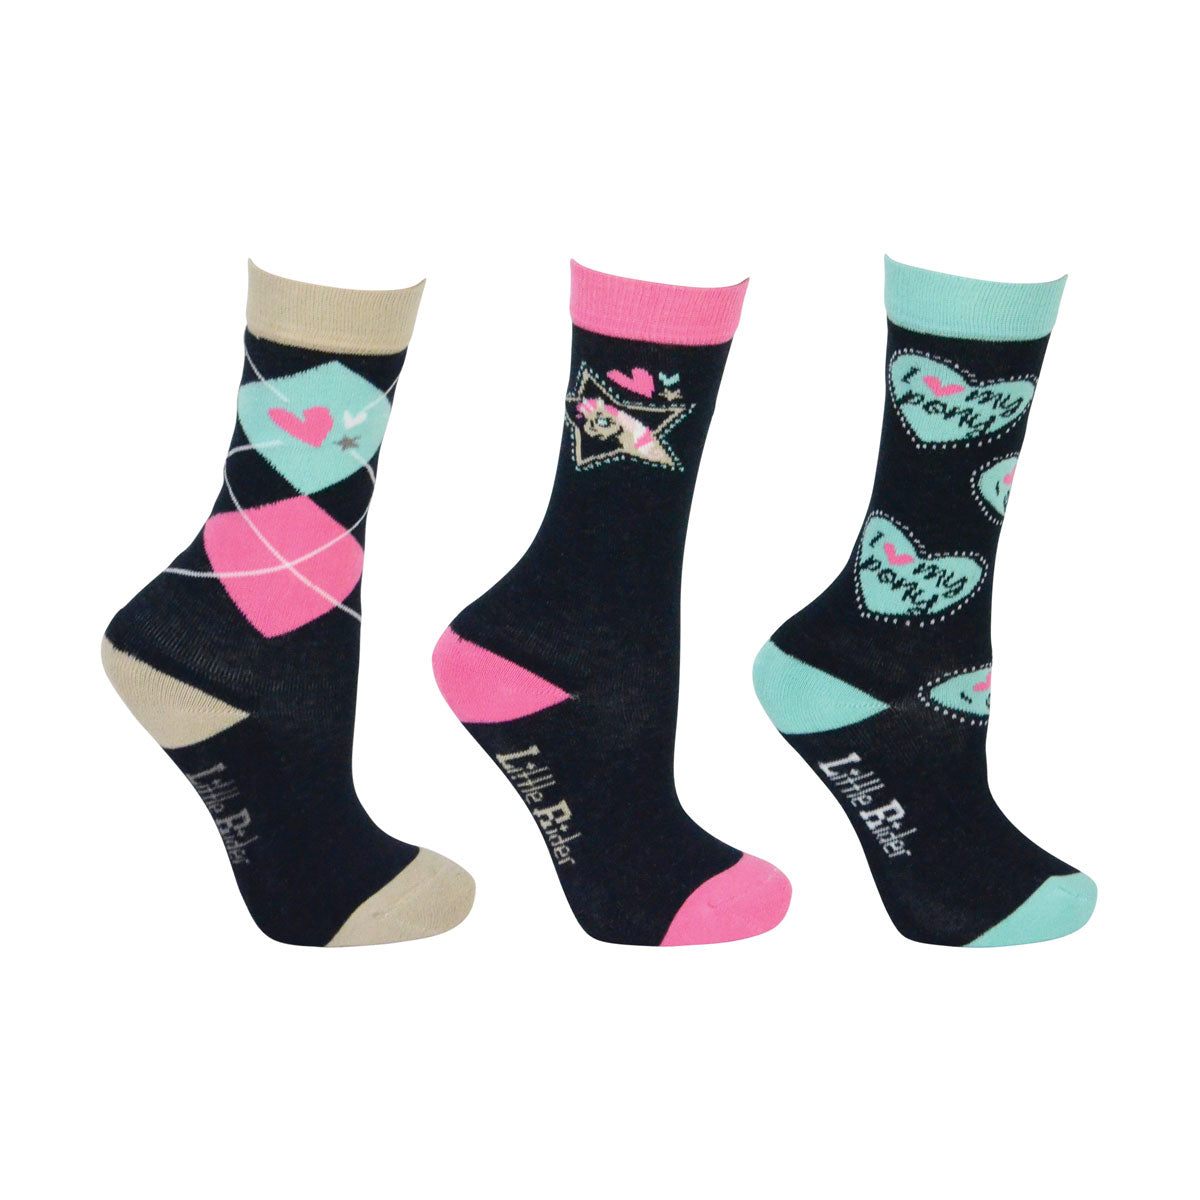 I Love My Pony Collection Socks by Little Rider (Pack of 3) Riding Socks Barnstaple Equestrian Supplies